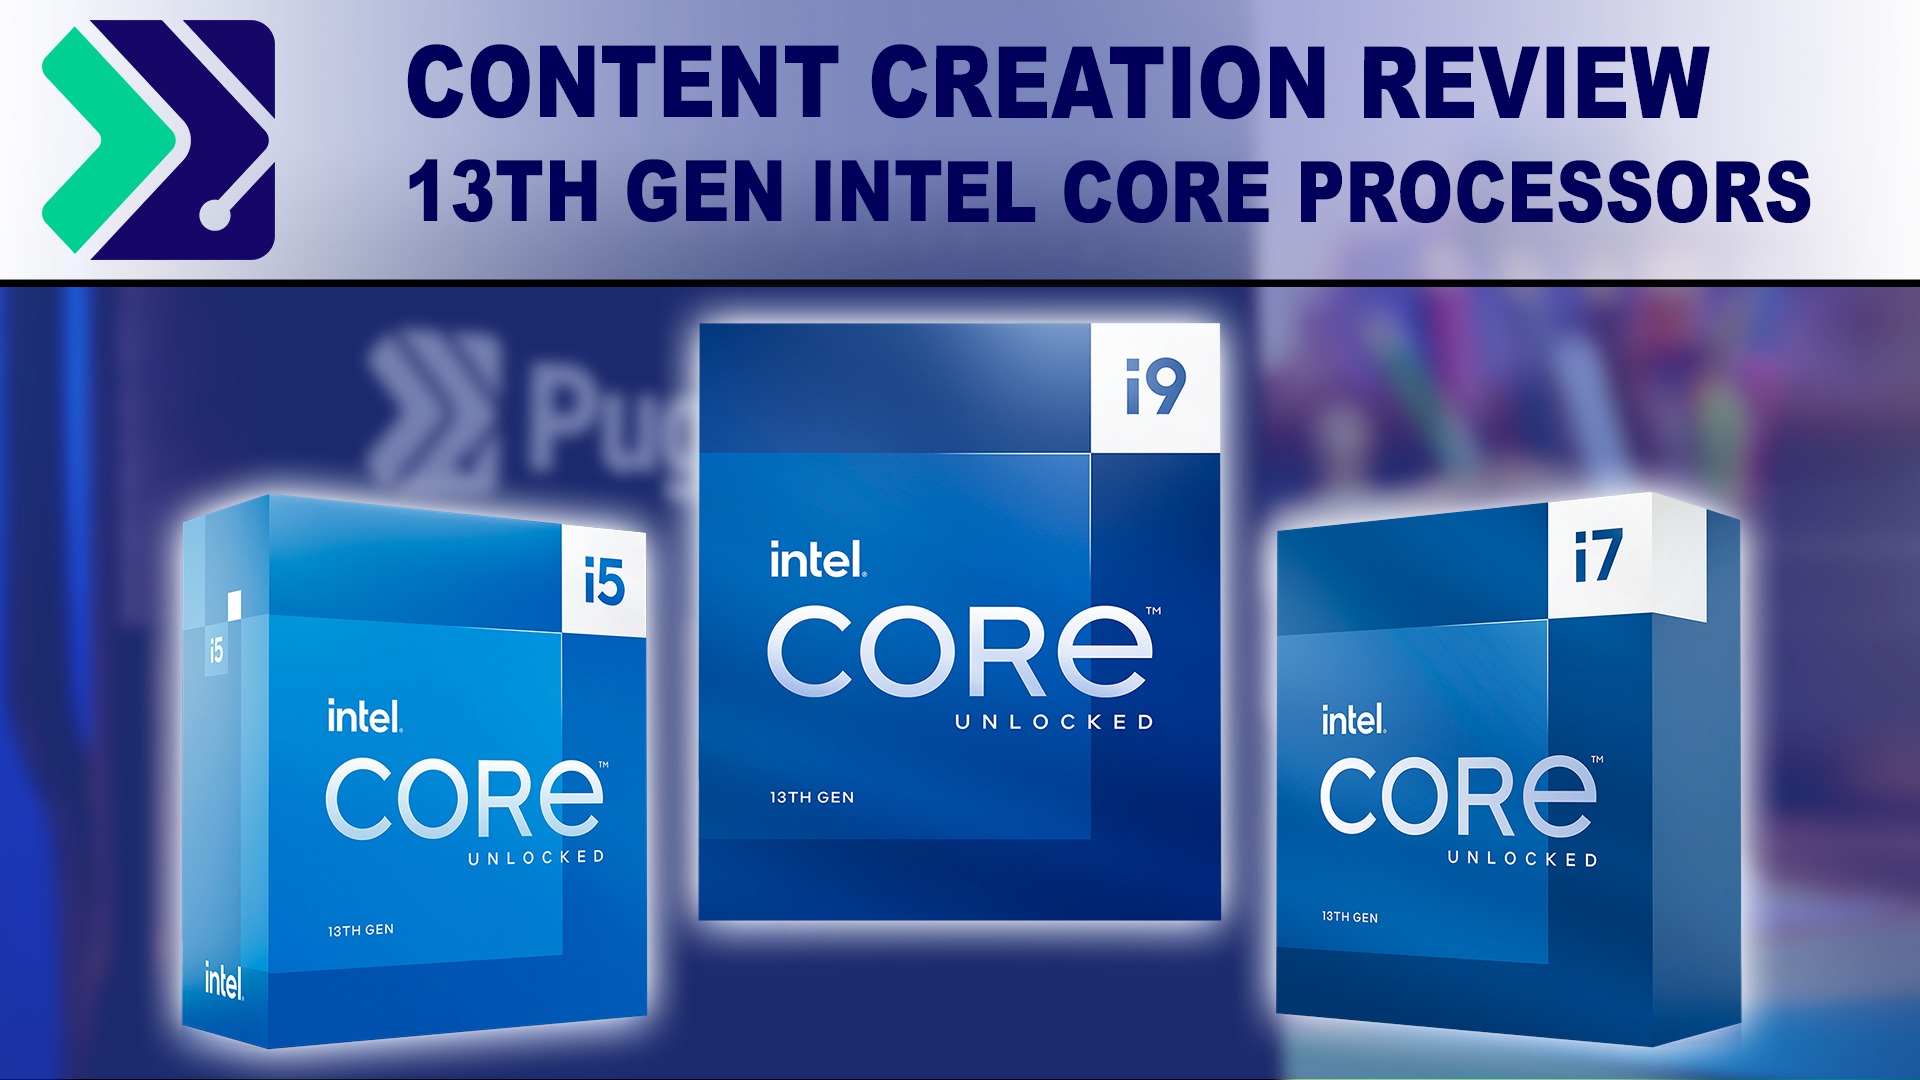 13th Gen Intel Core Processors Content Creation Review | Puget Systems